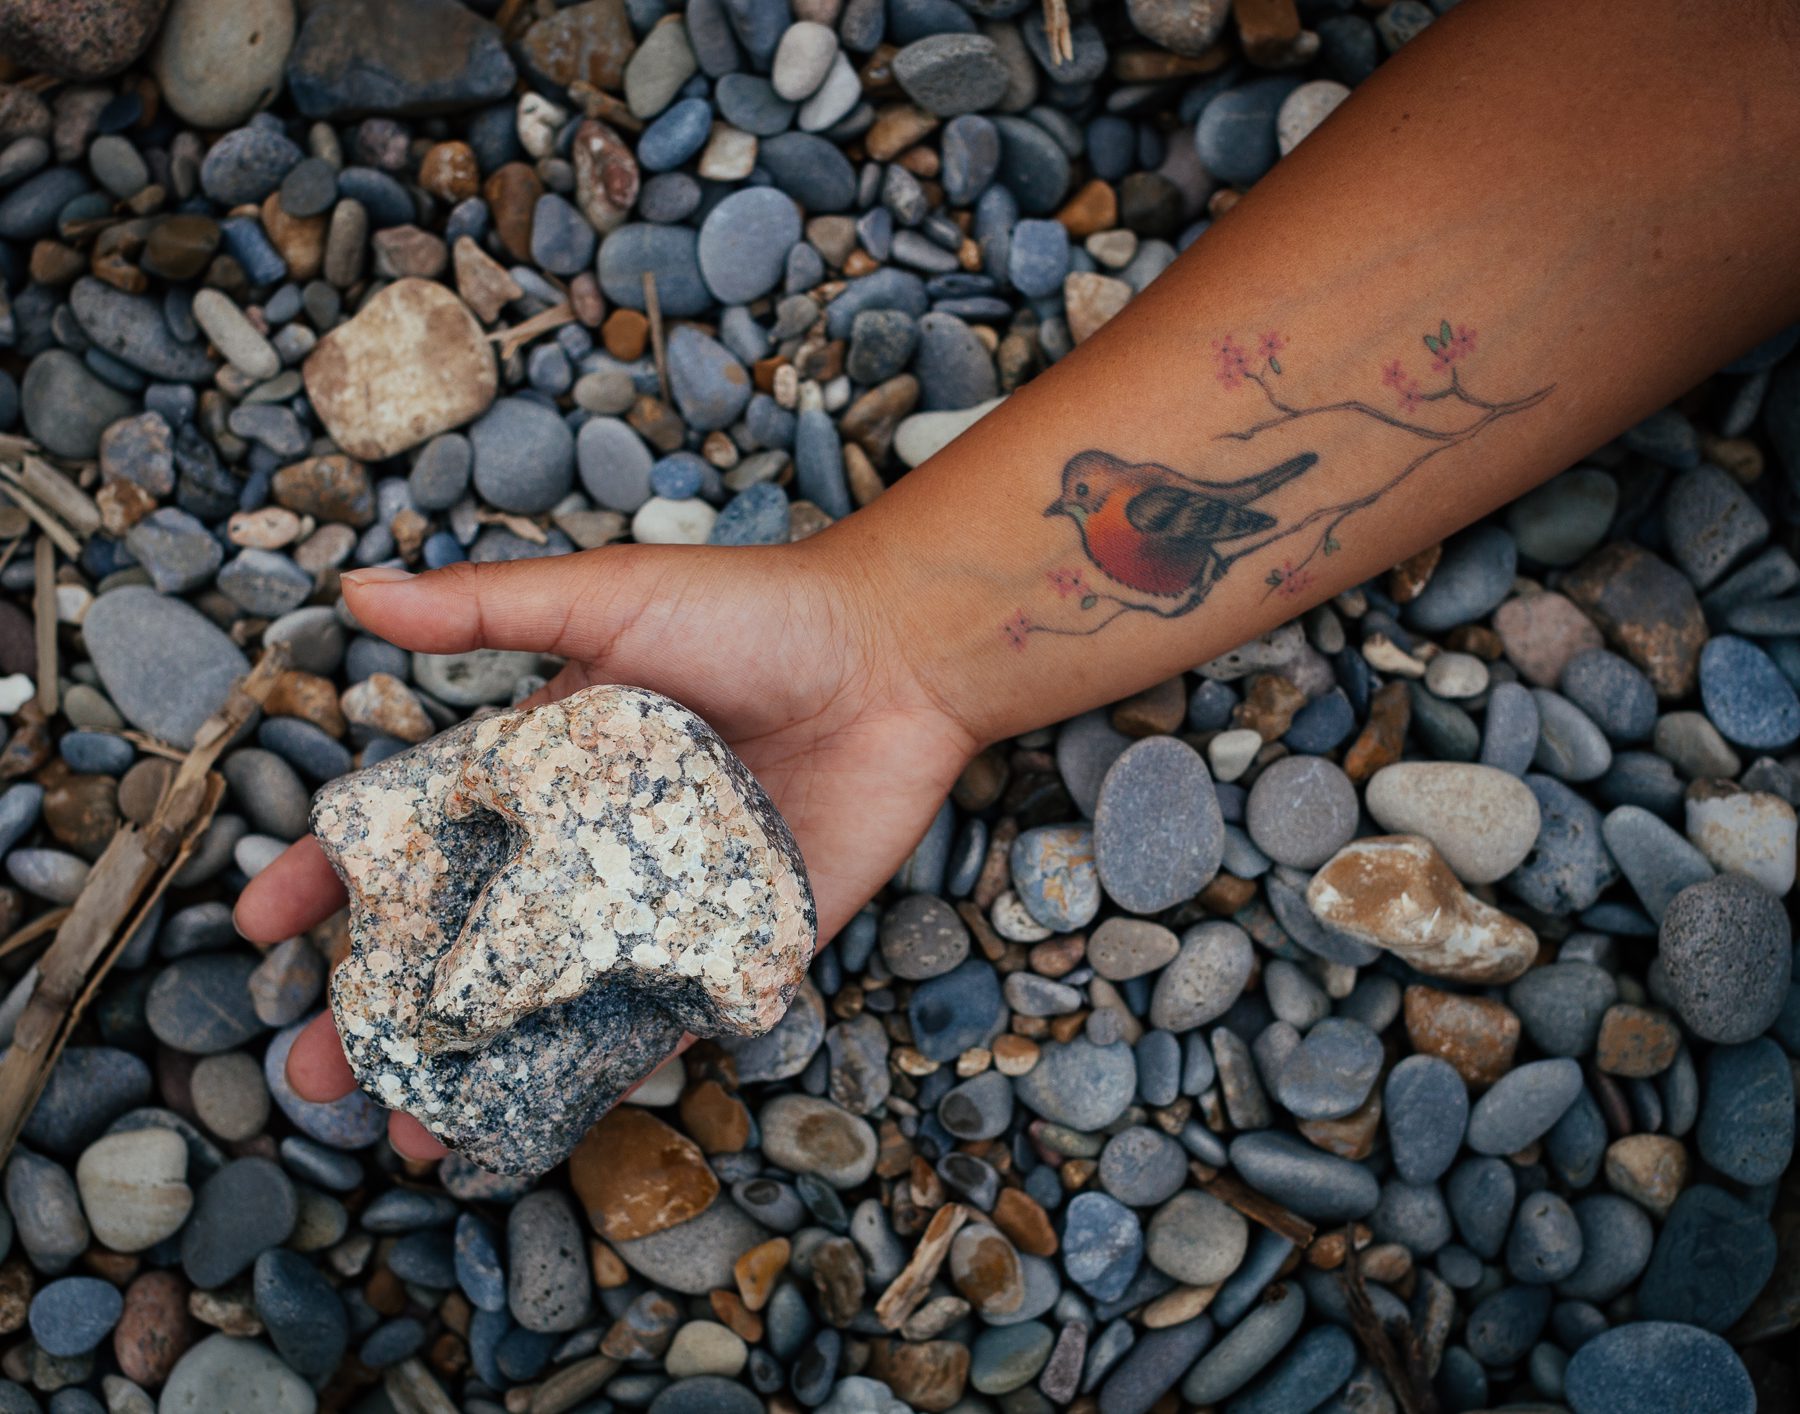 Robin holding a rock she collected on the beach in Bataan.